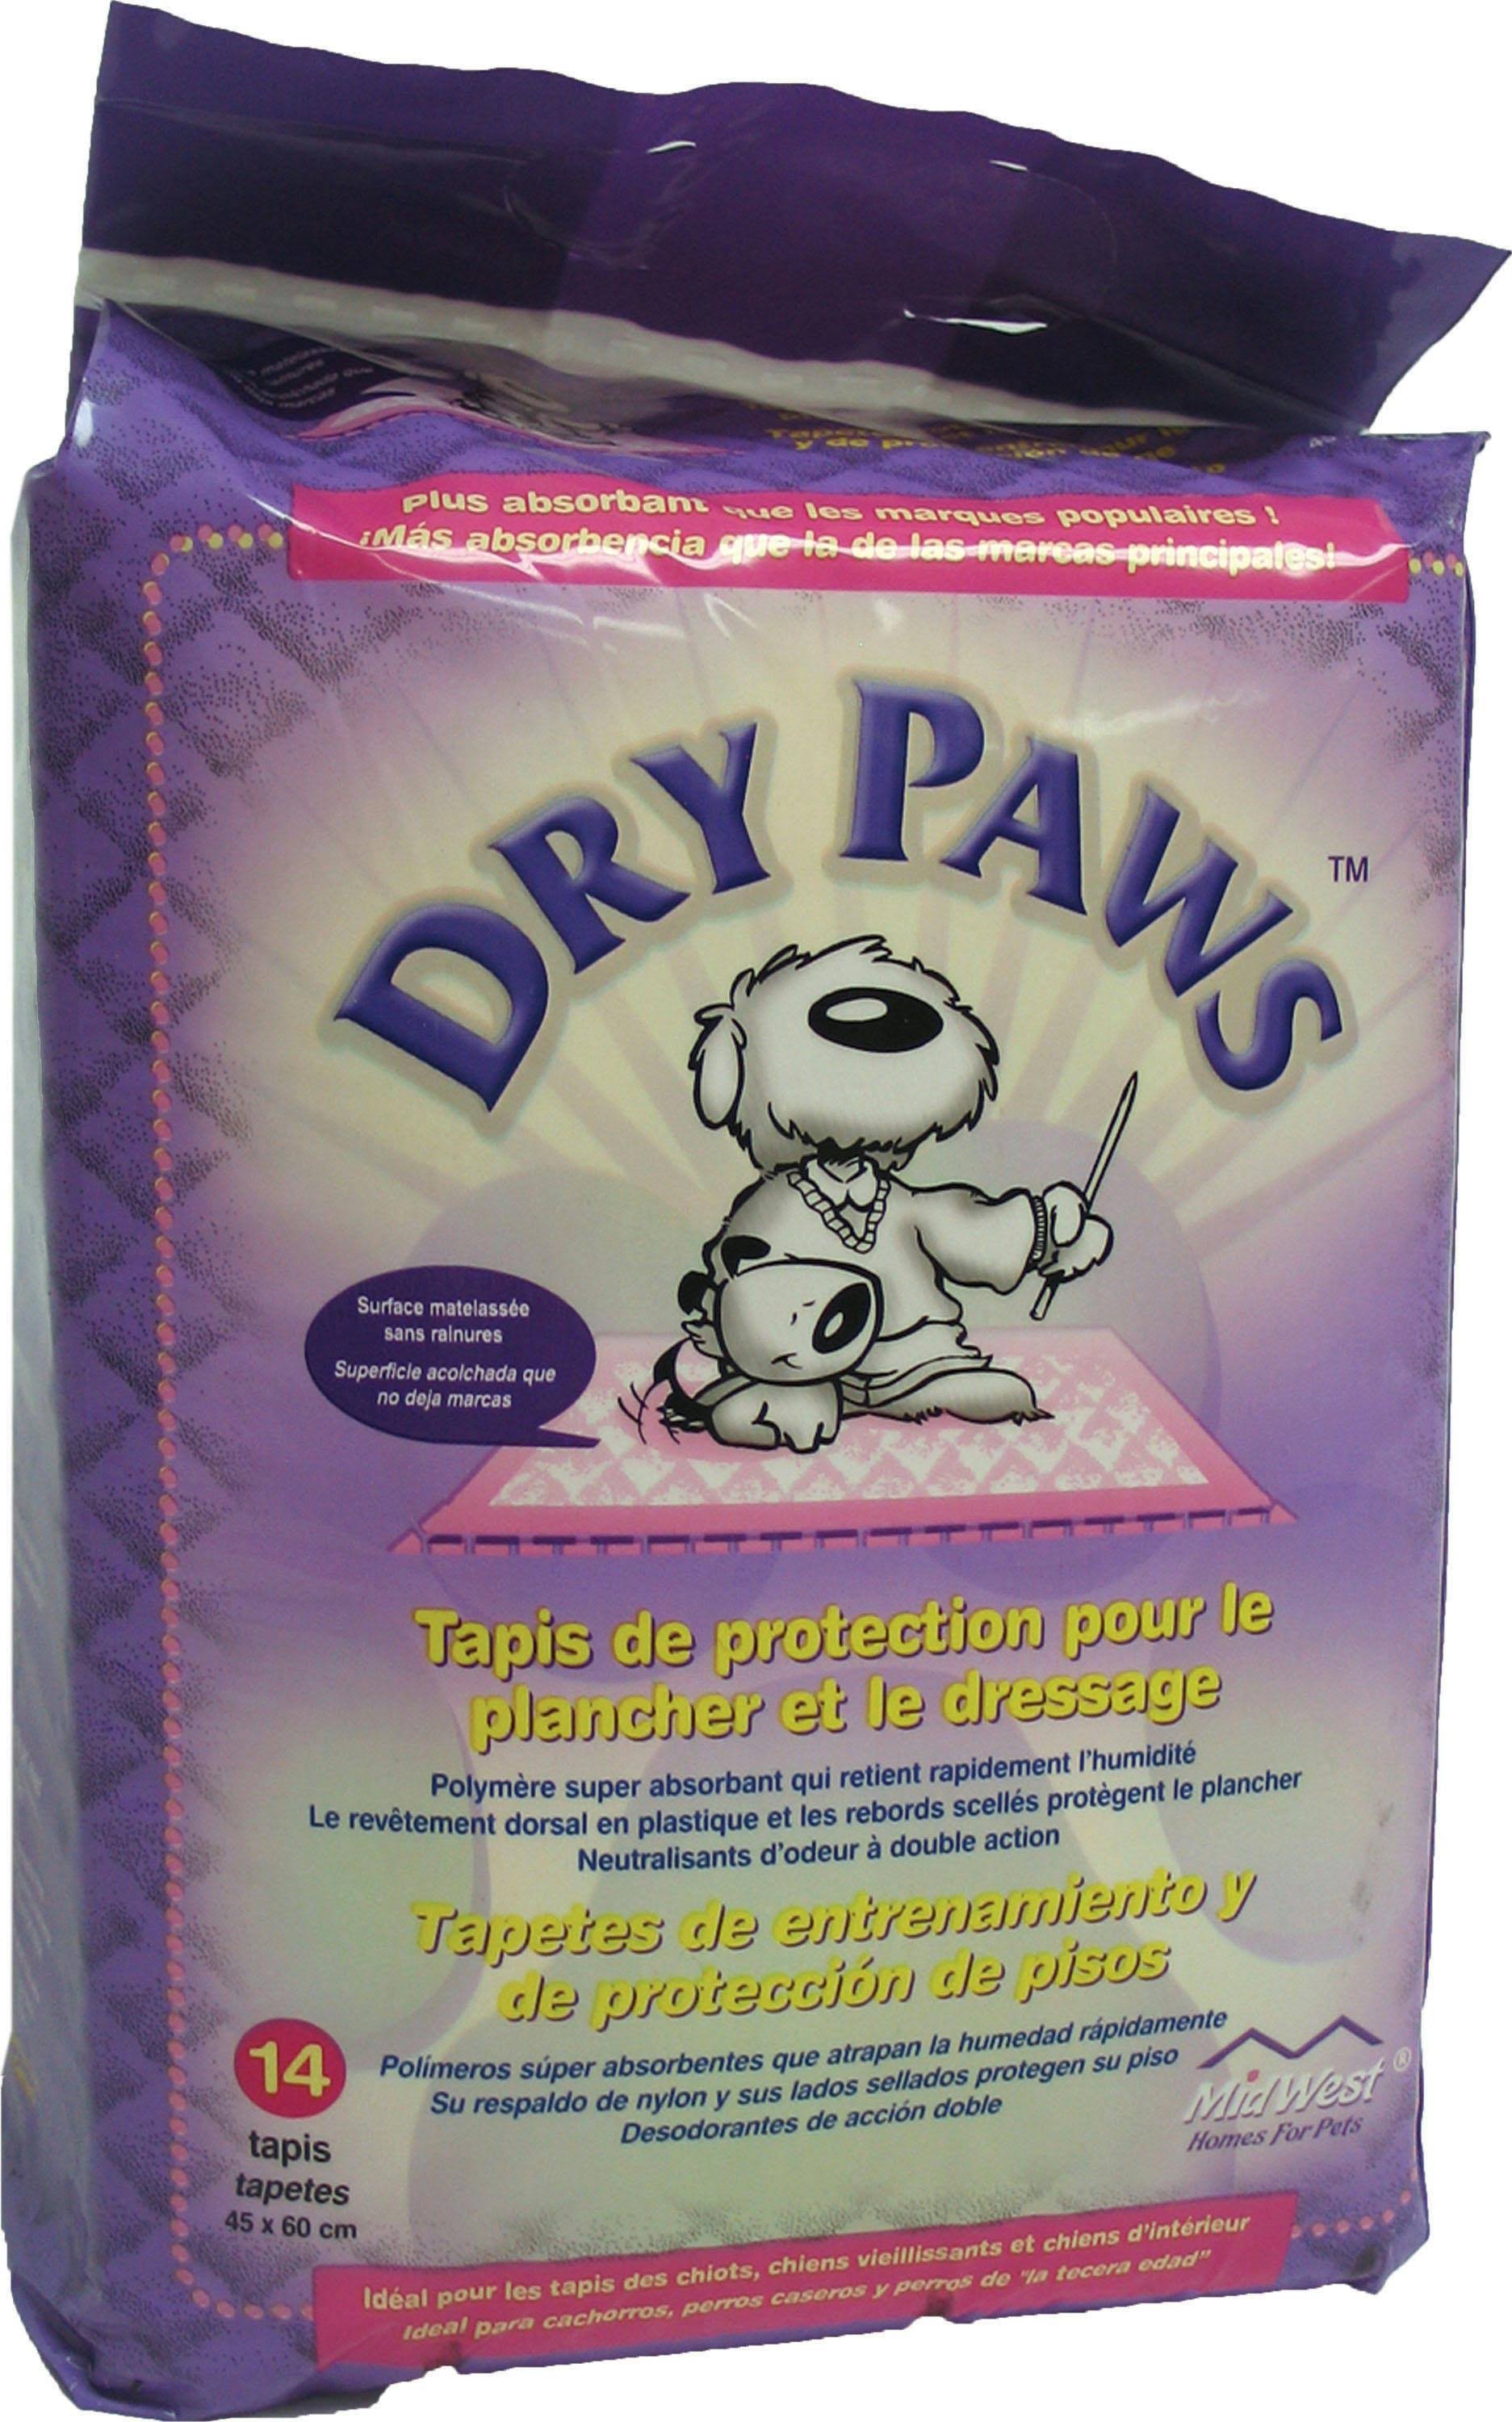 Midwest Homes for Pets Dry Paws Training Pads